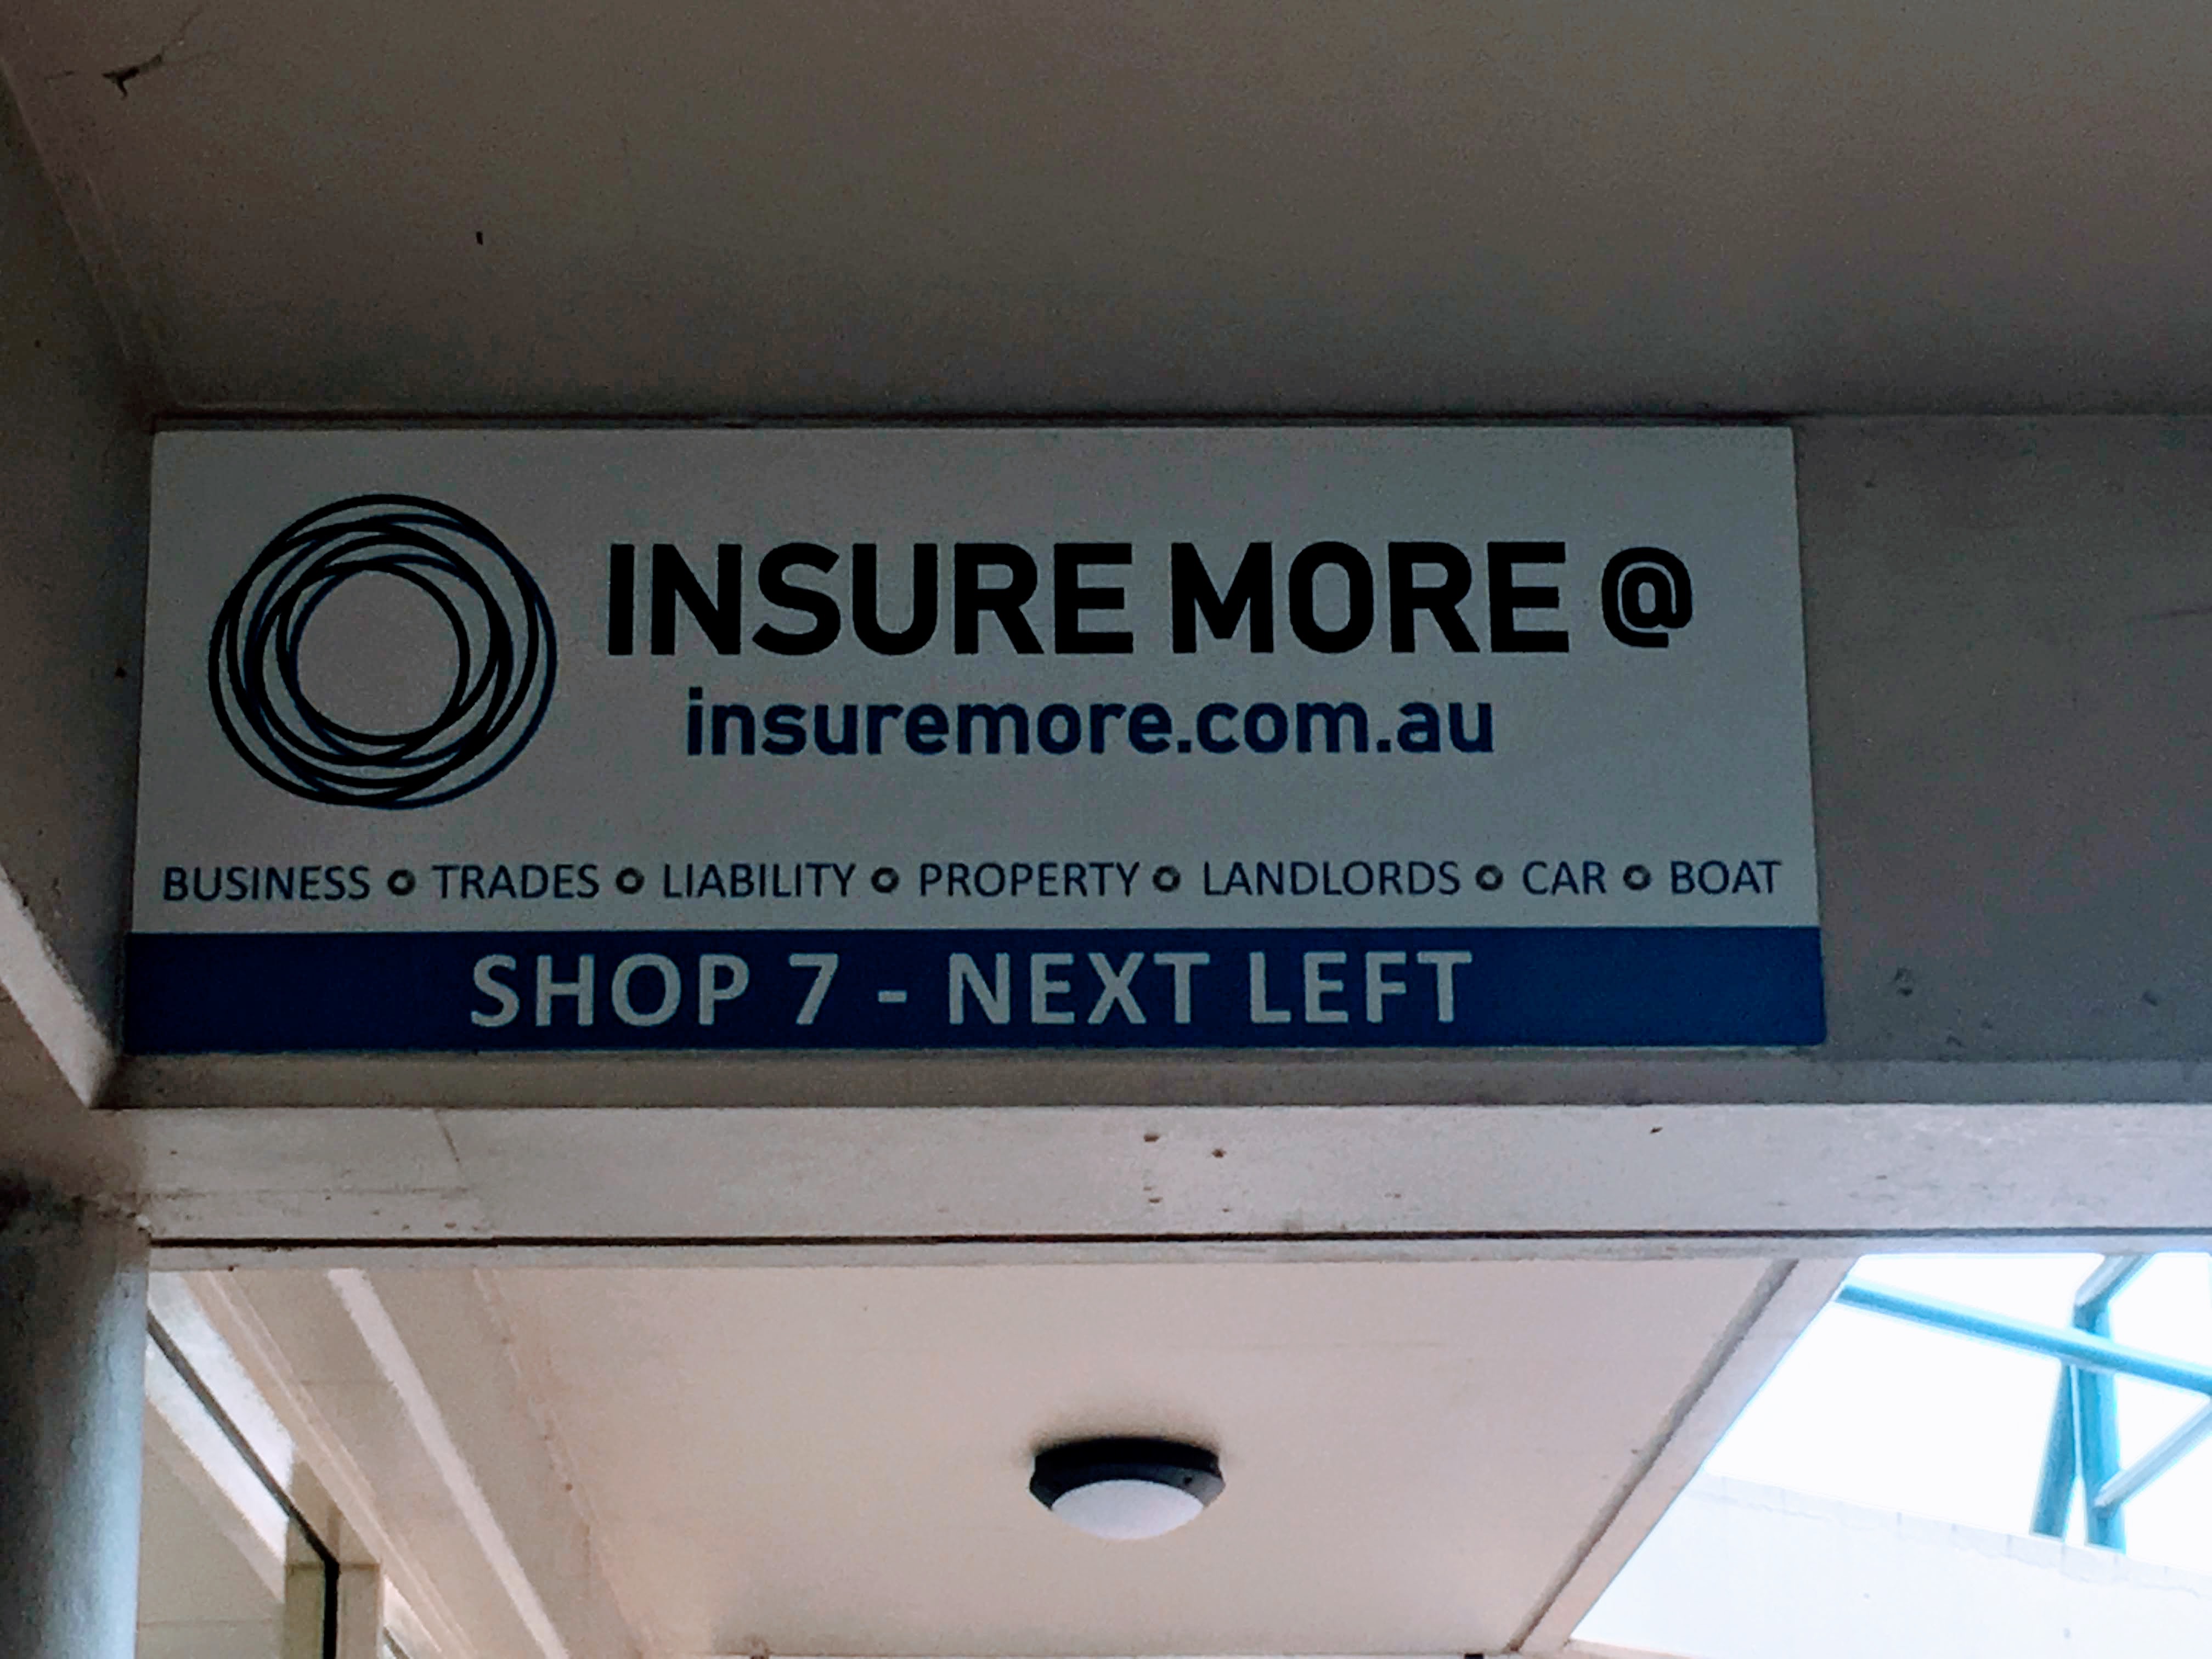 Images Insure More at